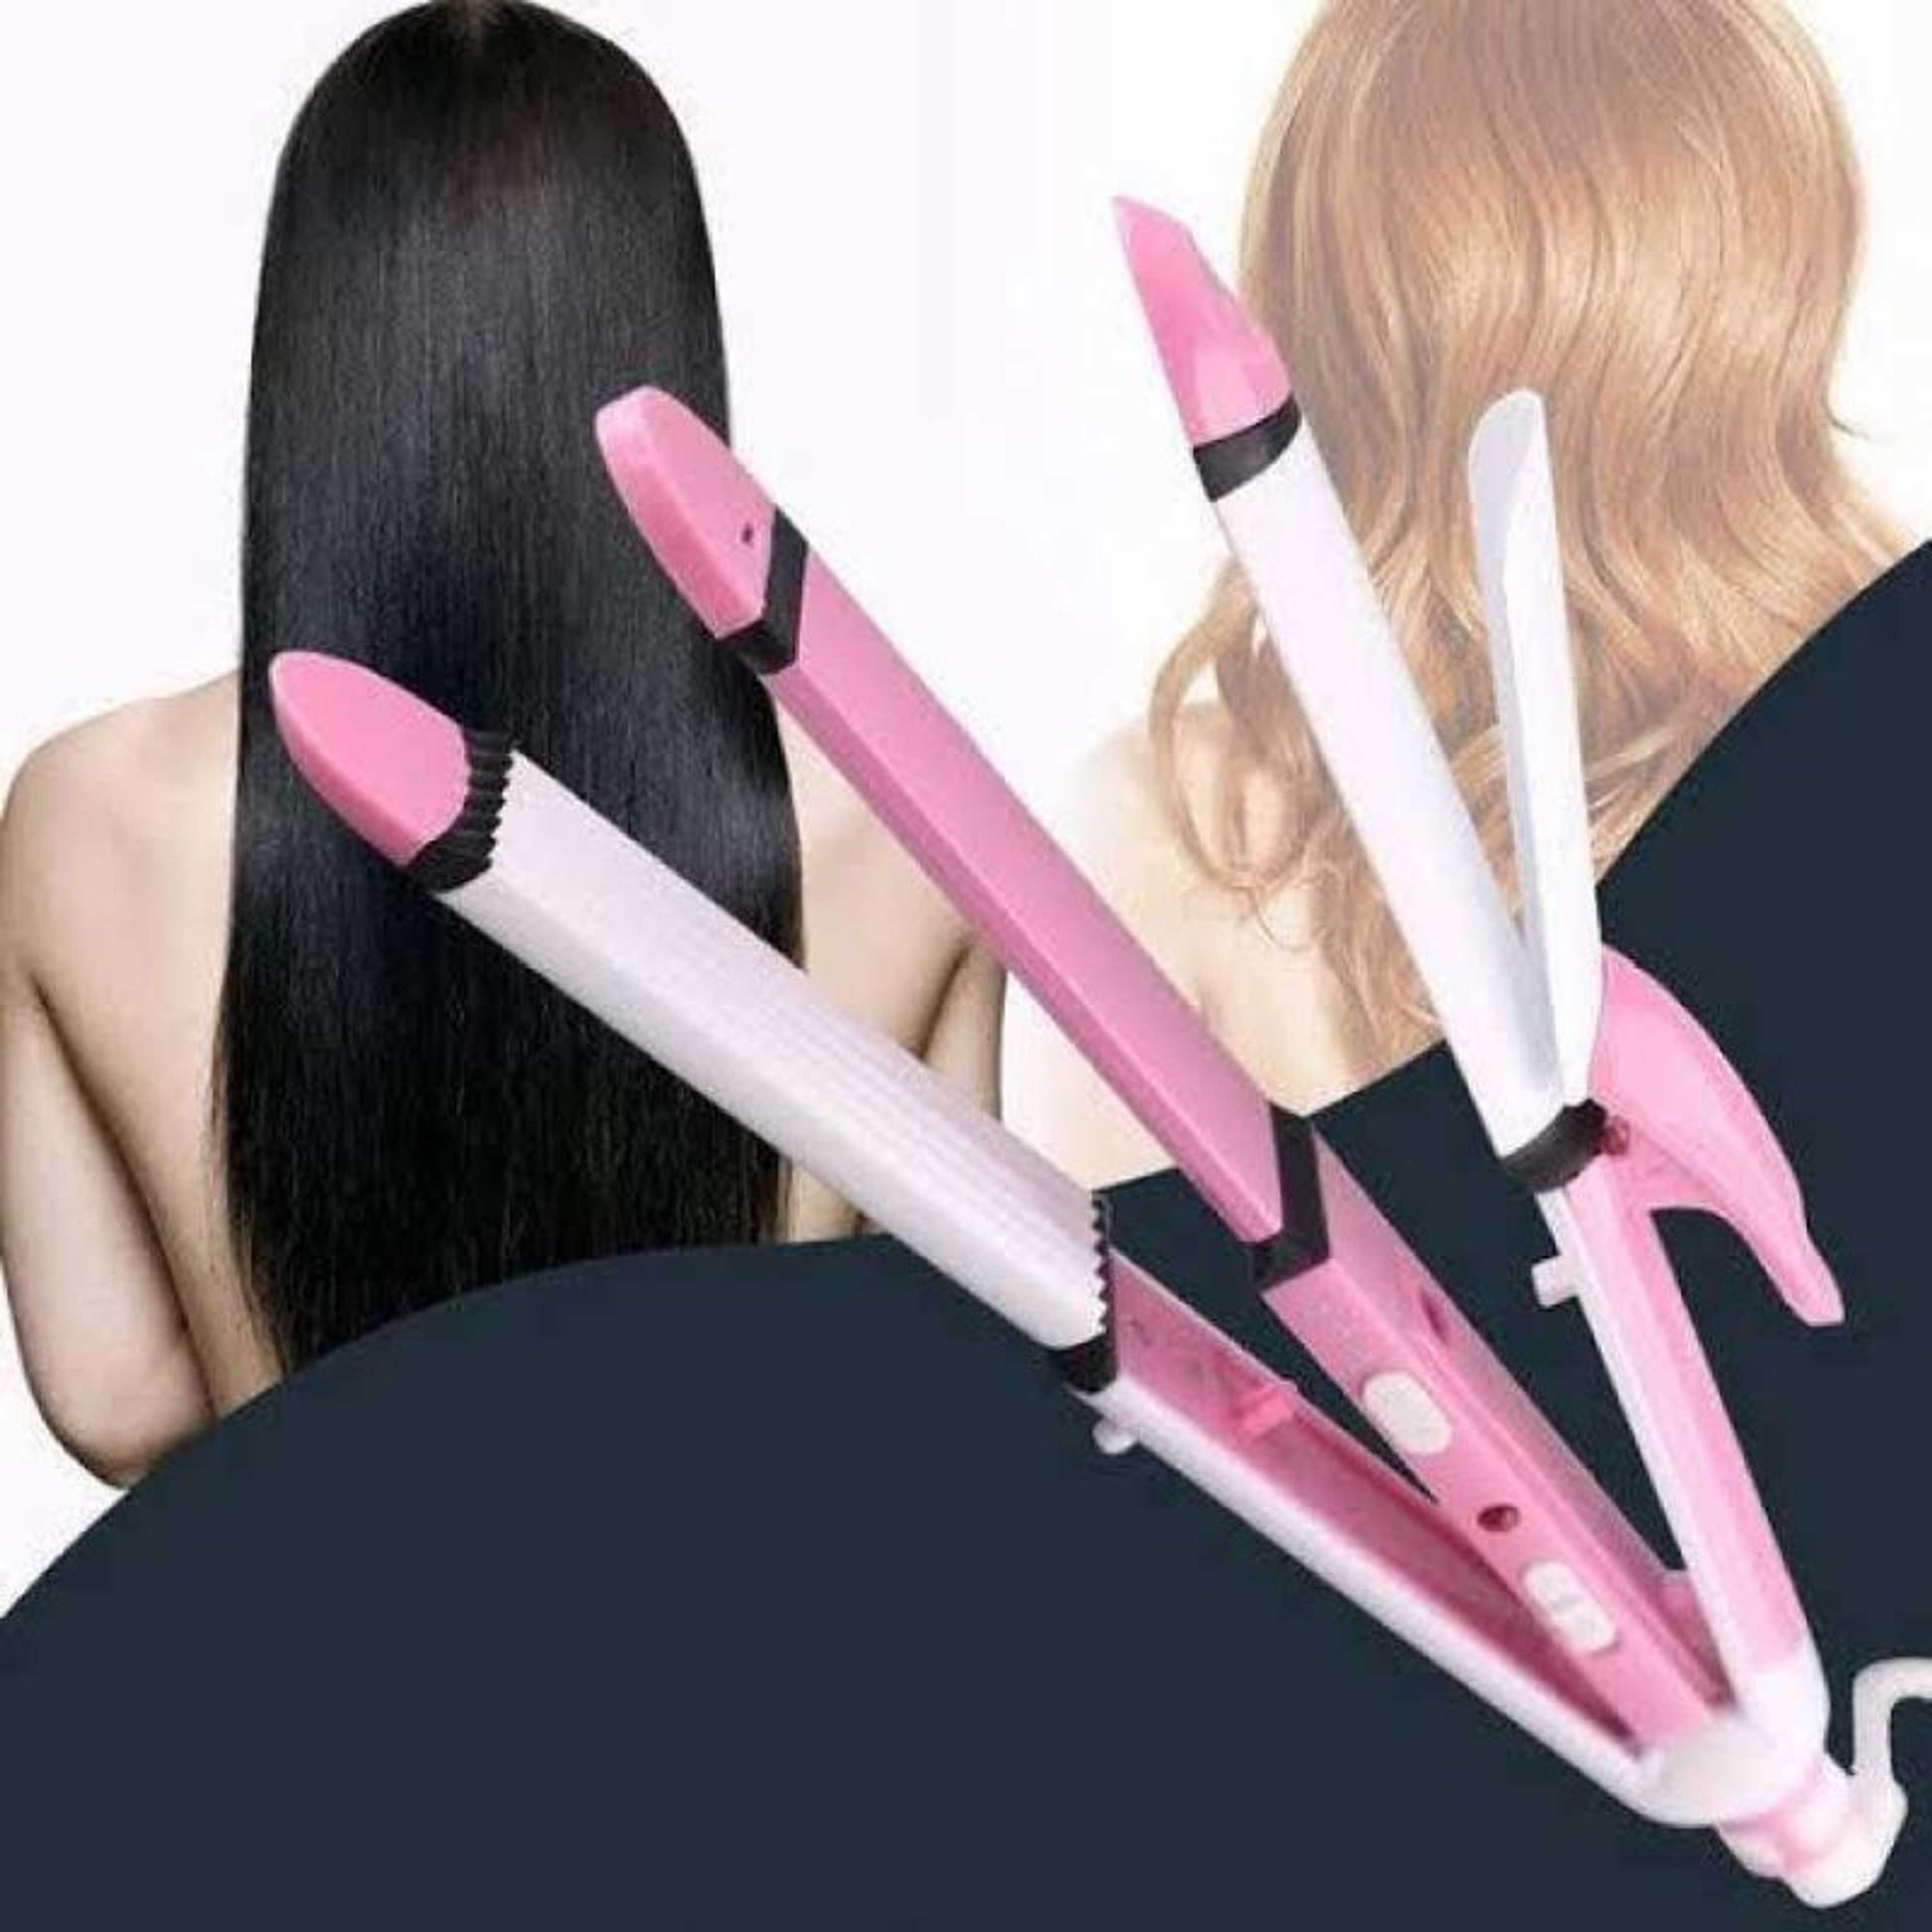 KM 1291 Professional 3 in1 Hair Straightener for women Hair Beauty Salon All in one Hair Fashion Styles